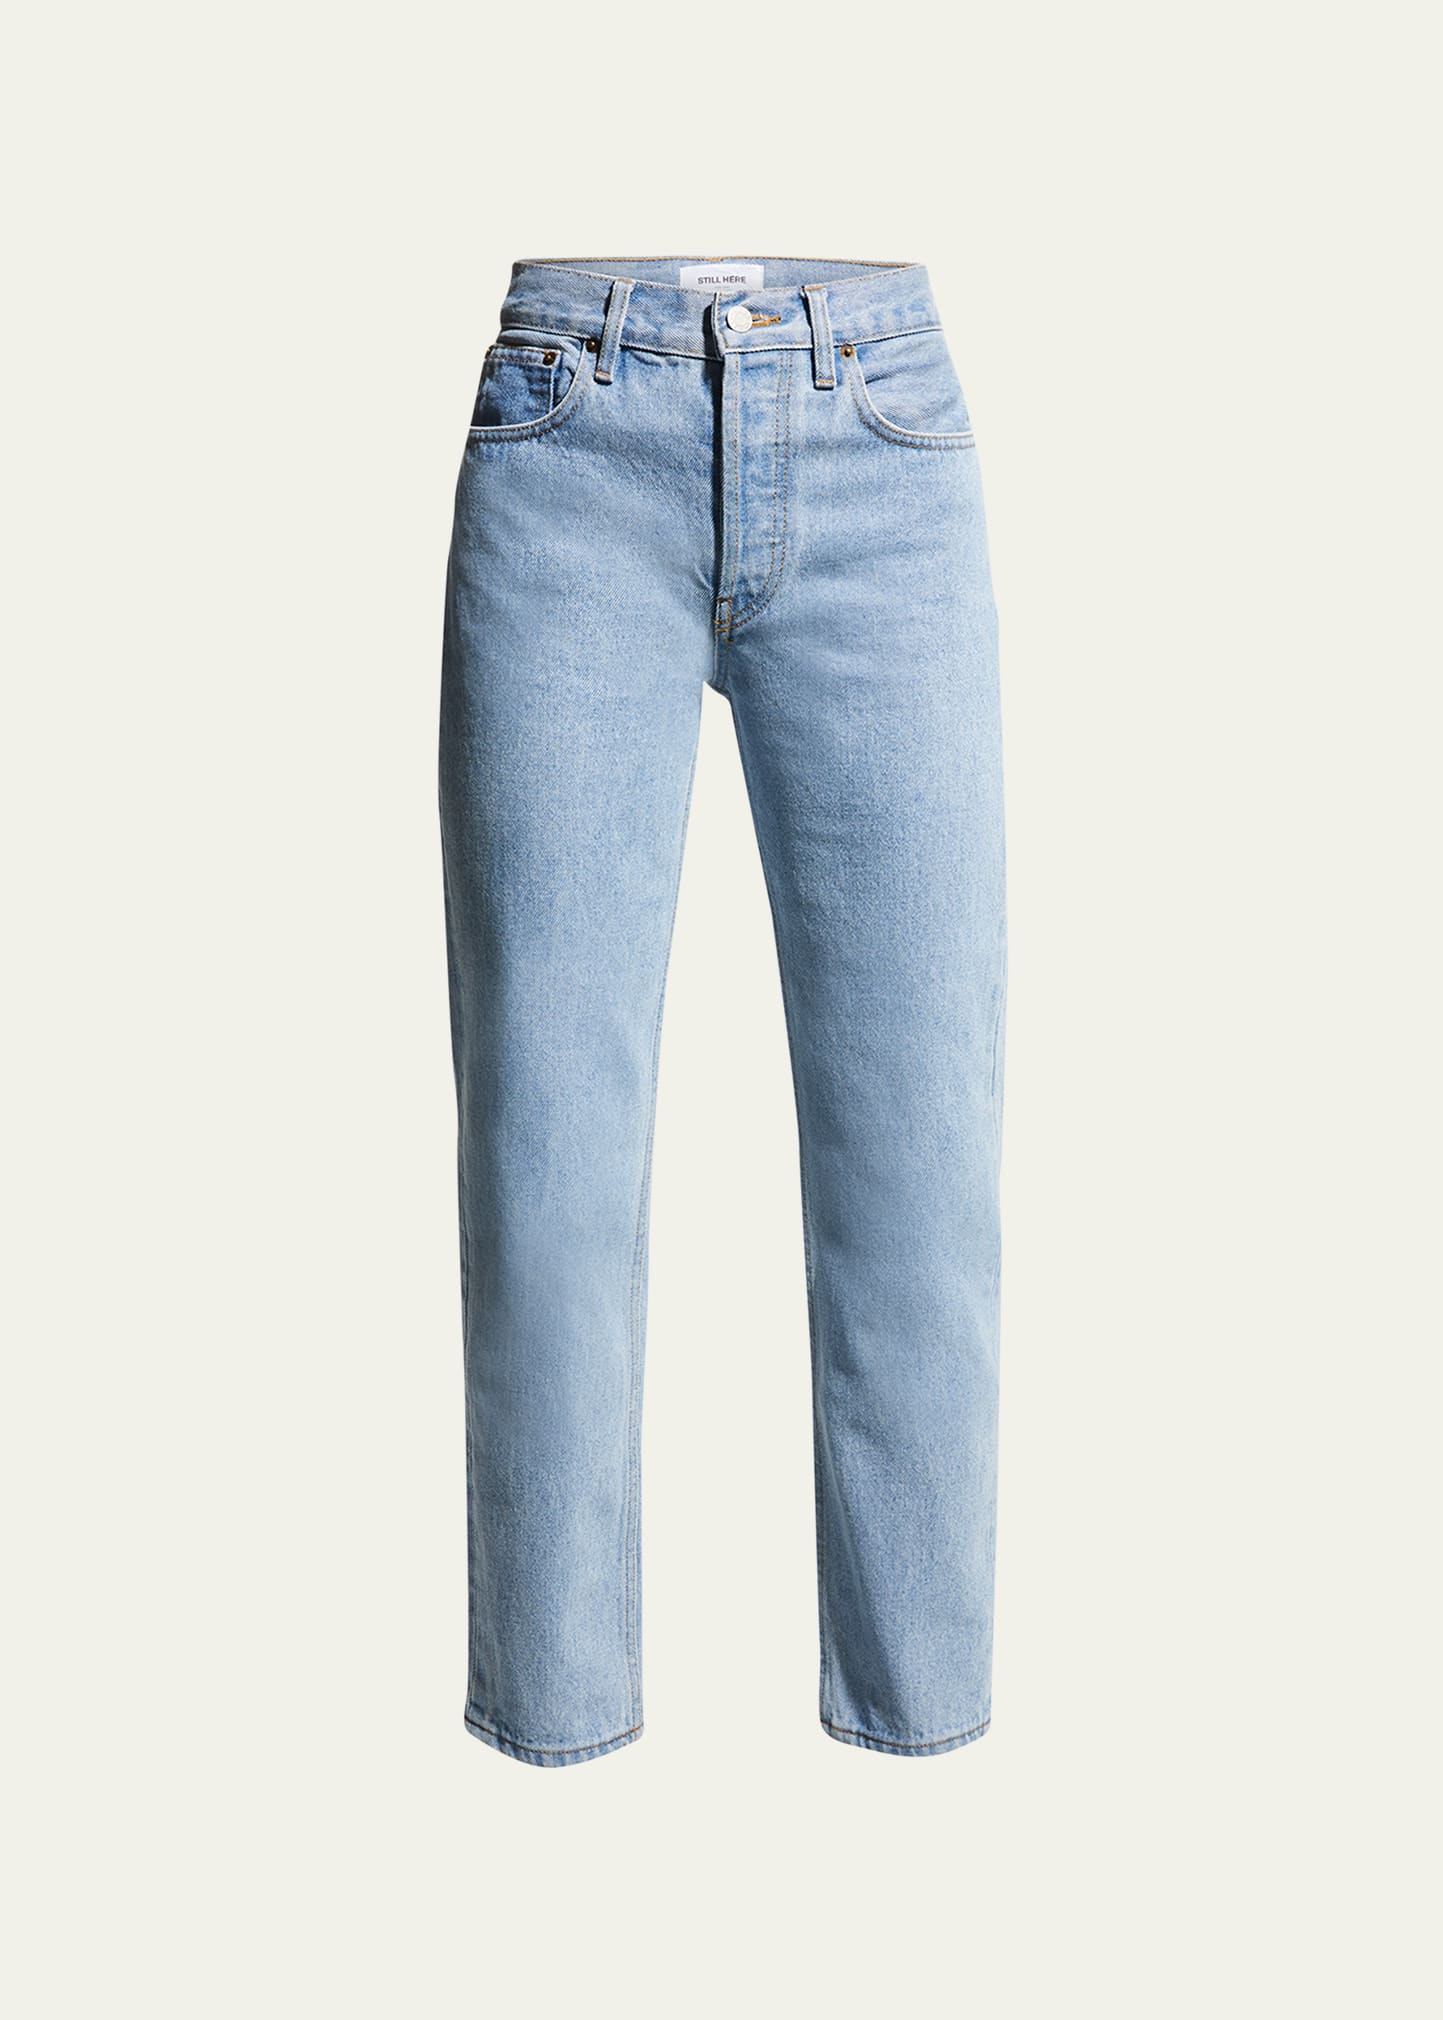 Tate Cropped Jeans with Contrast Panels